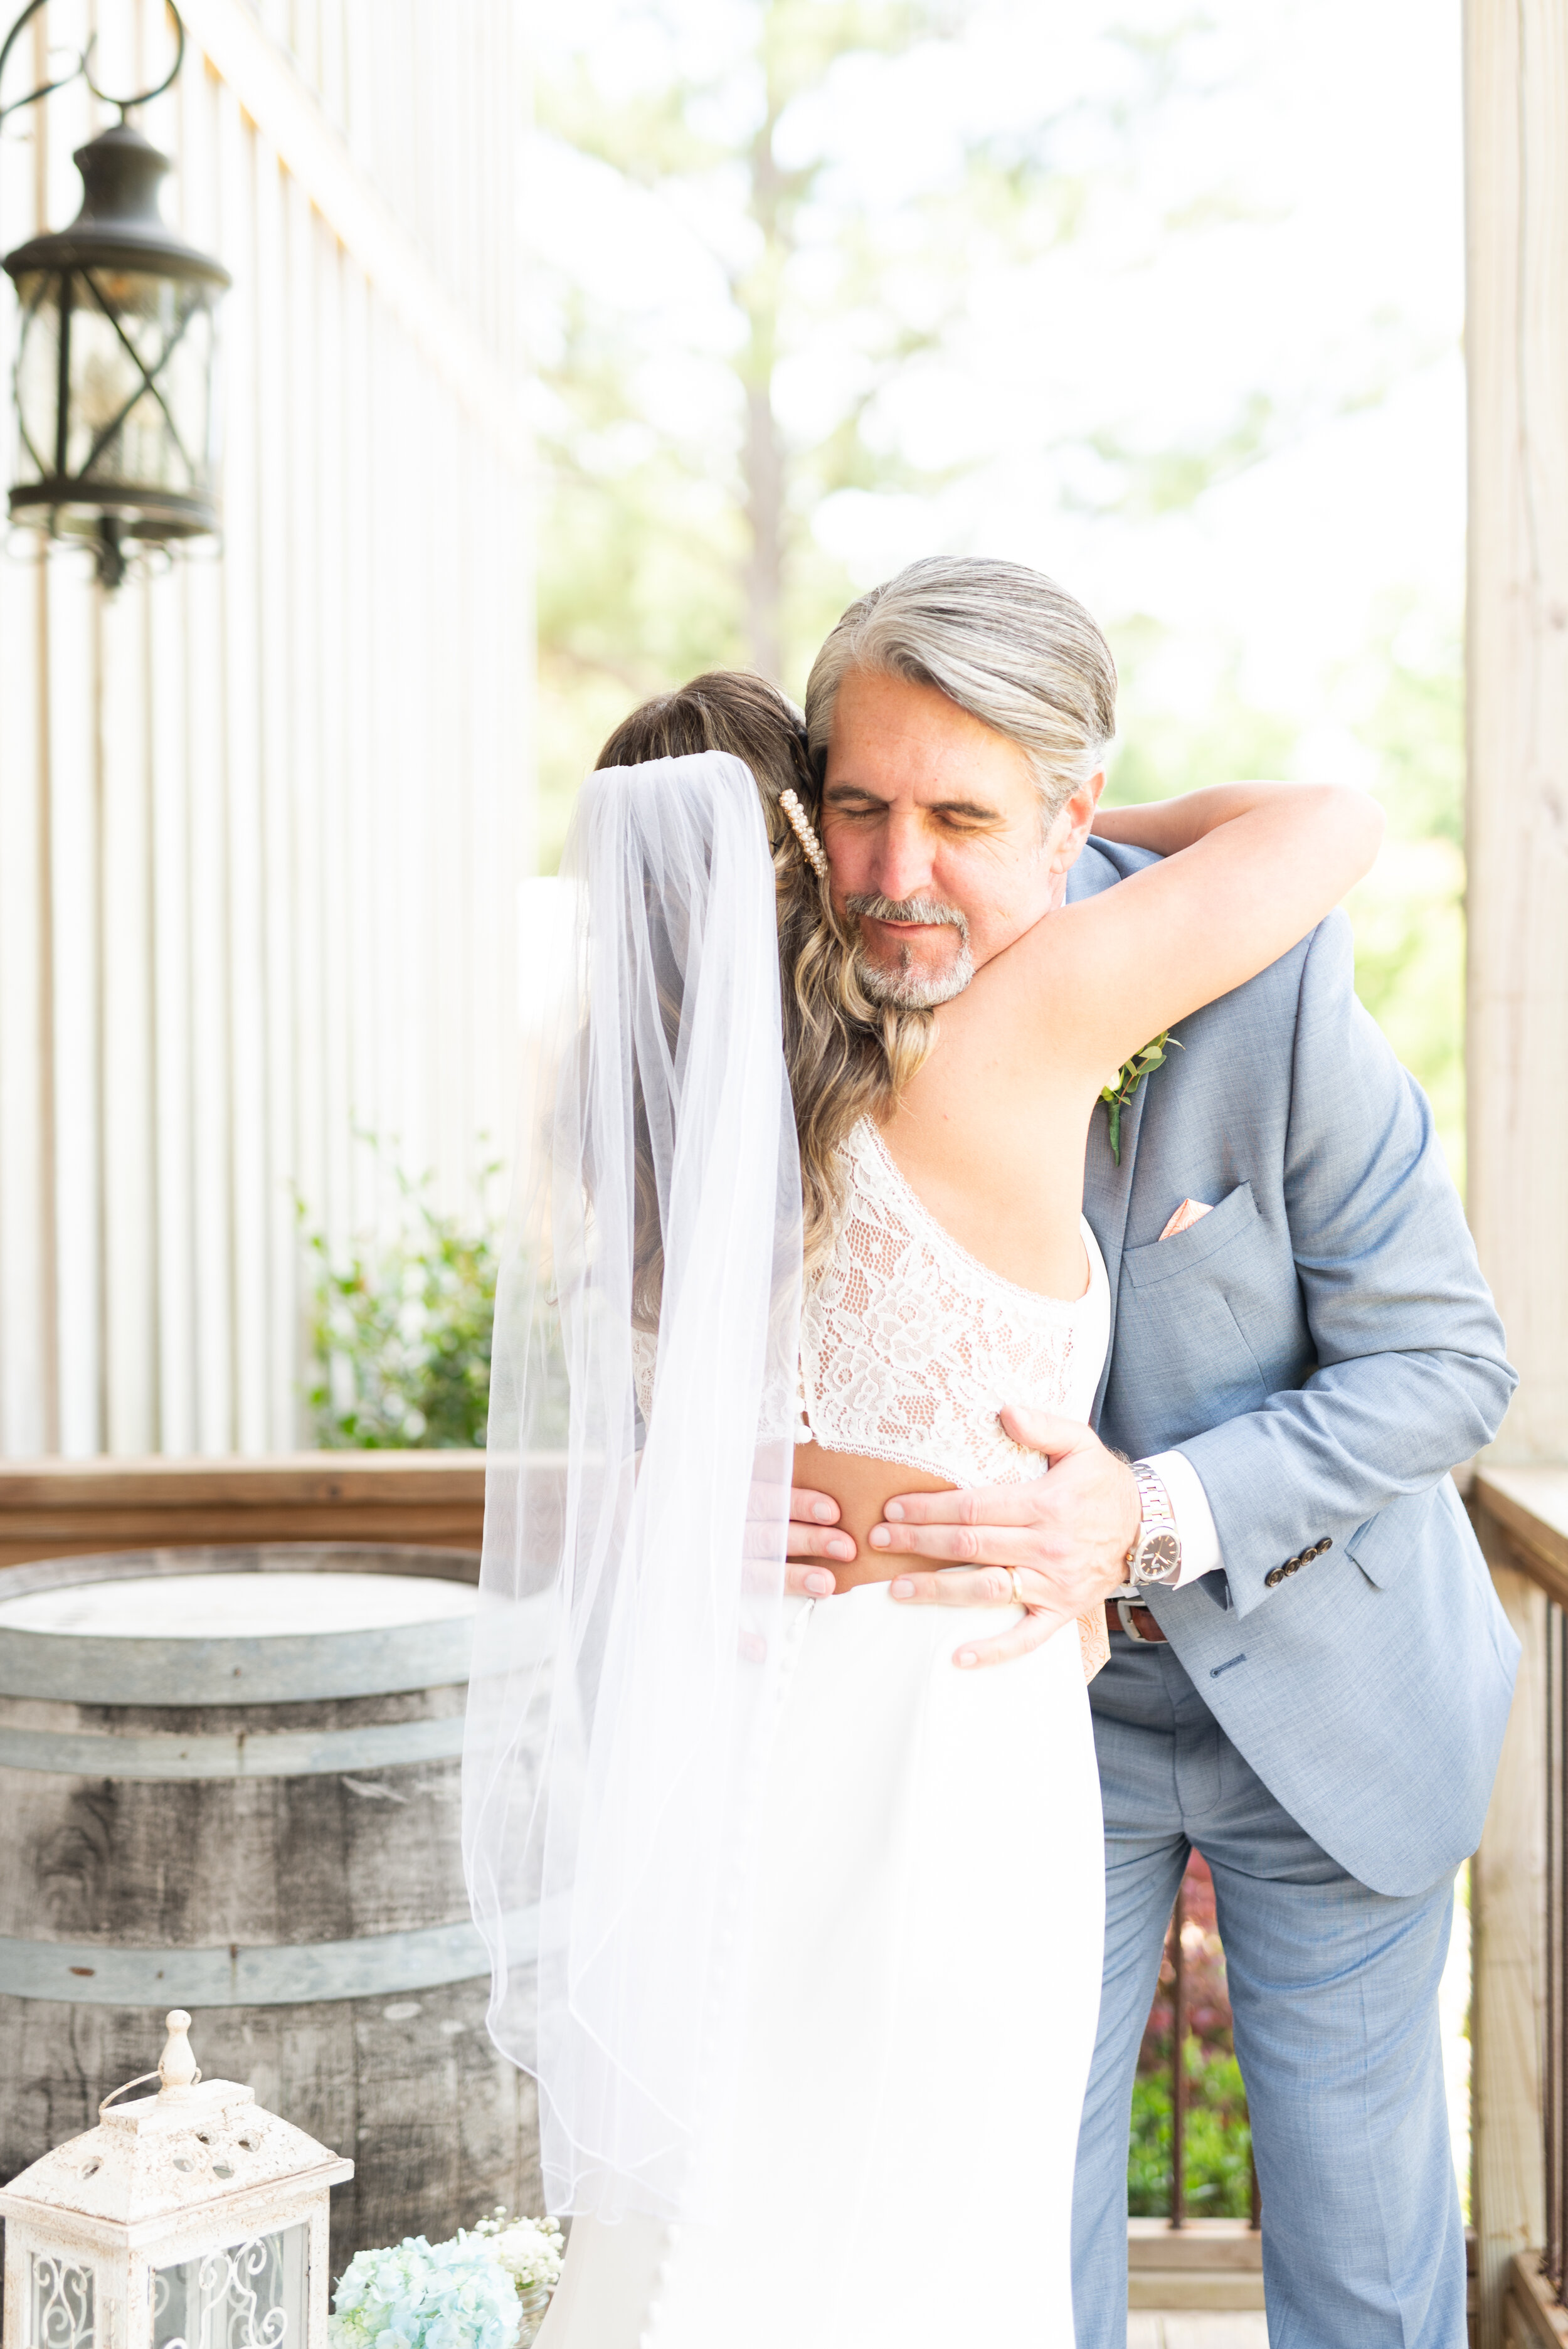 Kalioka Stables Wedding in Alabama Photography Photographed by Kristen Marcus Photography